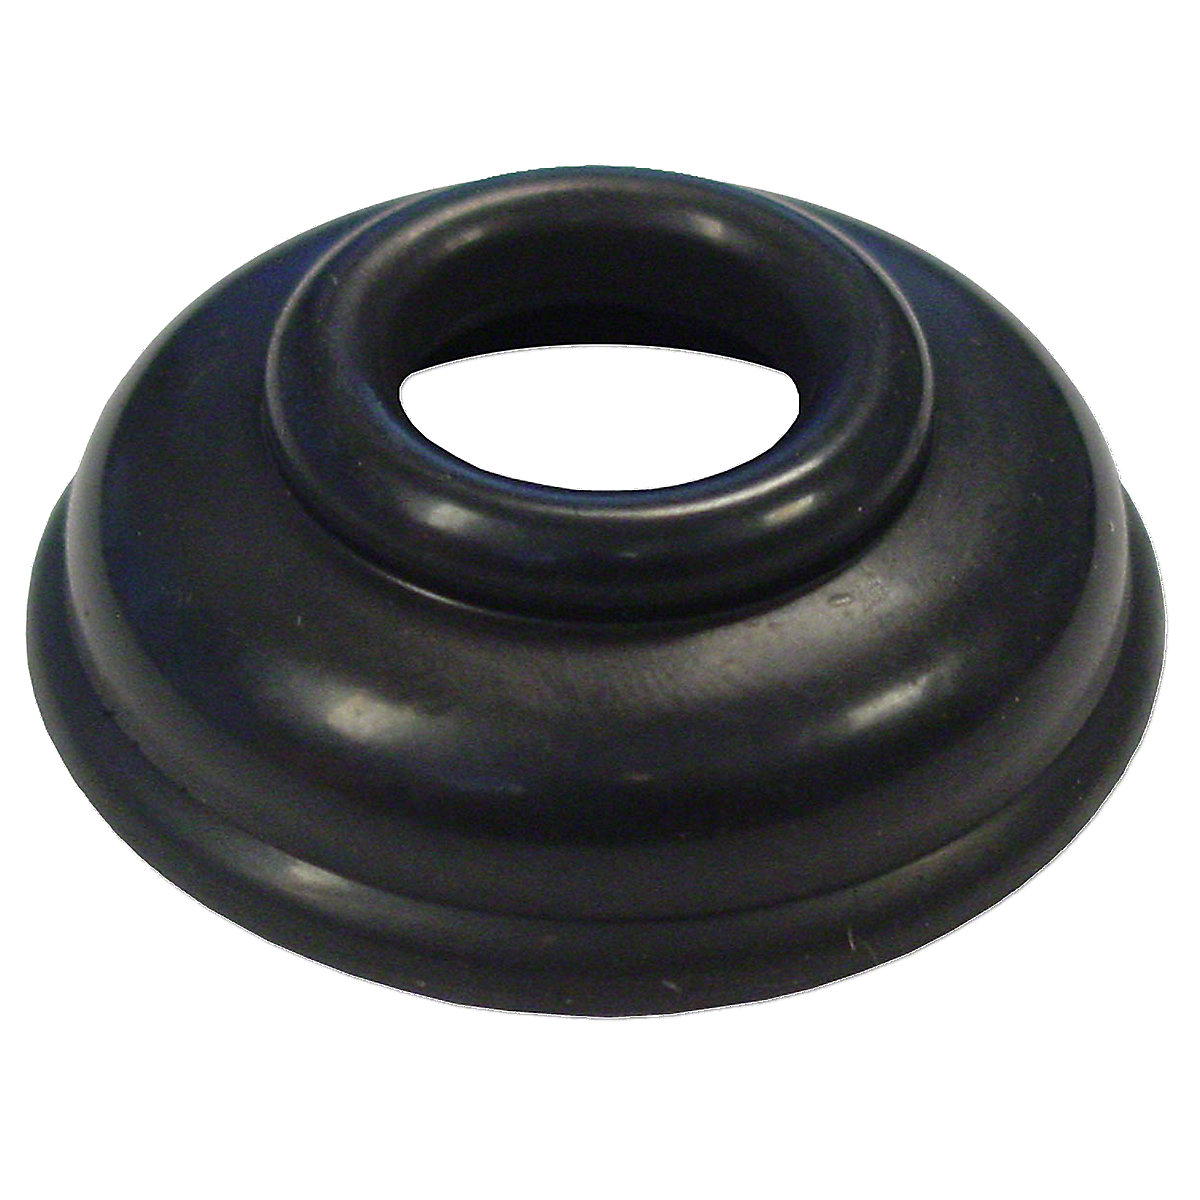 Tie Rod Dust Boot For Massey Ferguson: TE20, TEA20, TO20, TO30, TO35, 135, 20, 230, 235, 35, Super 90.